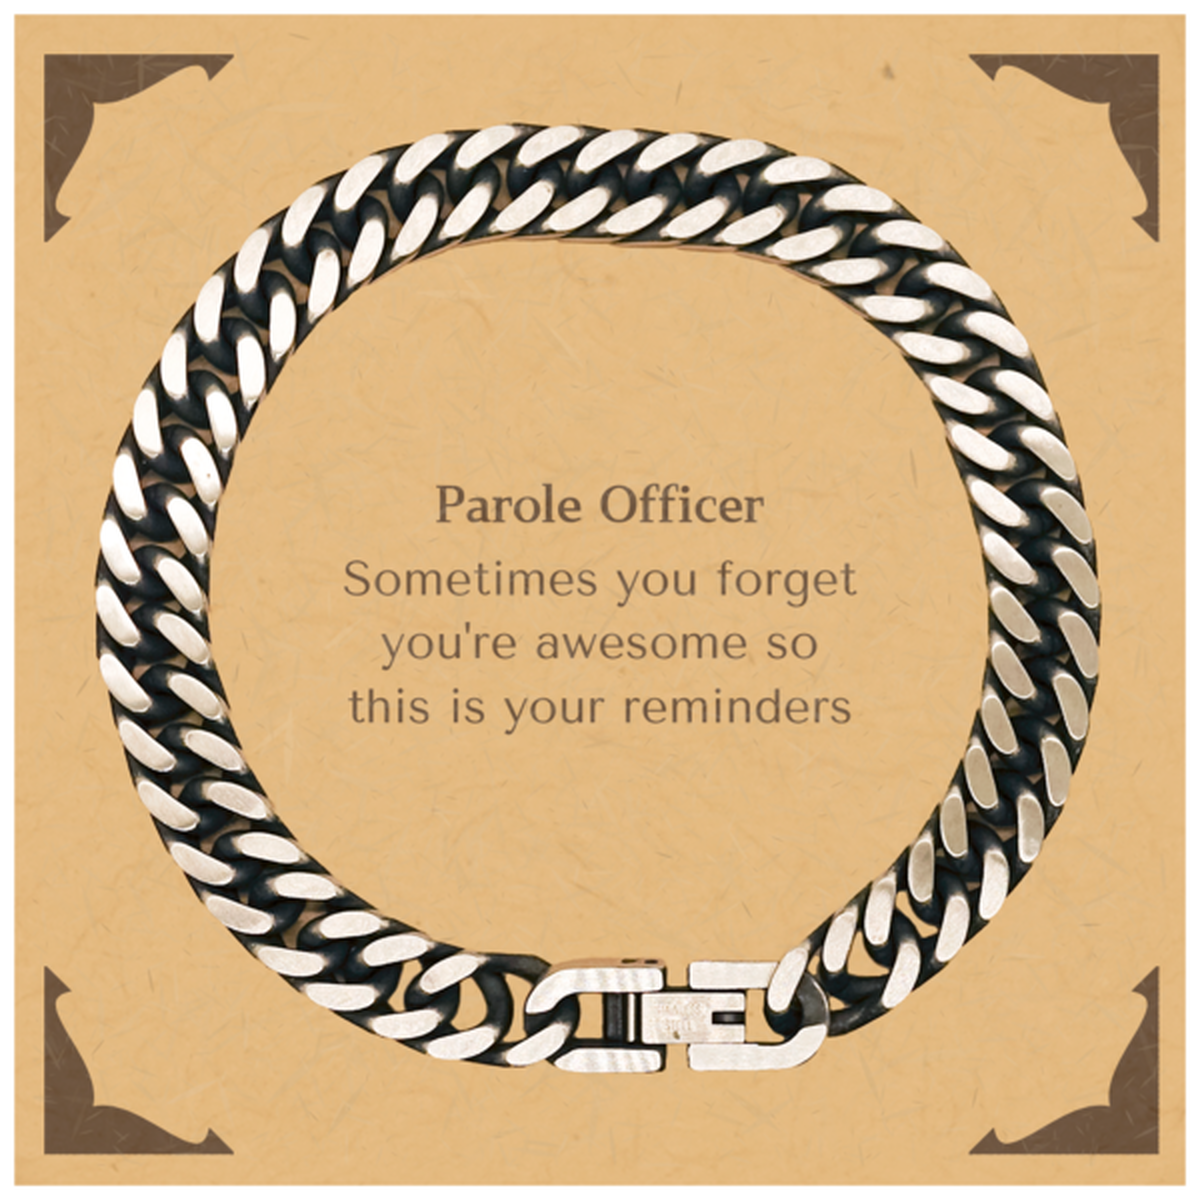 Sentimental Parole Officer Cuban Link Chain Bracelet, Parole Officer Sometimes you forget you're awesome so this is your reminders, Graduation Christmas Birthday Gifts for Parole Officer, Men, Women, Coworkers